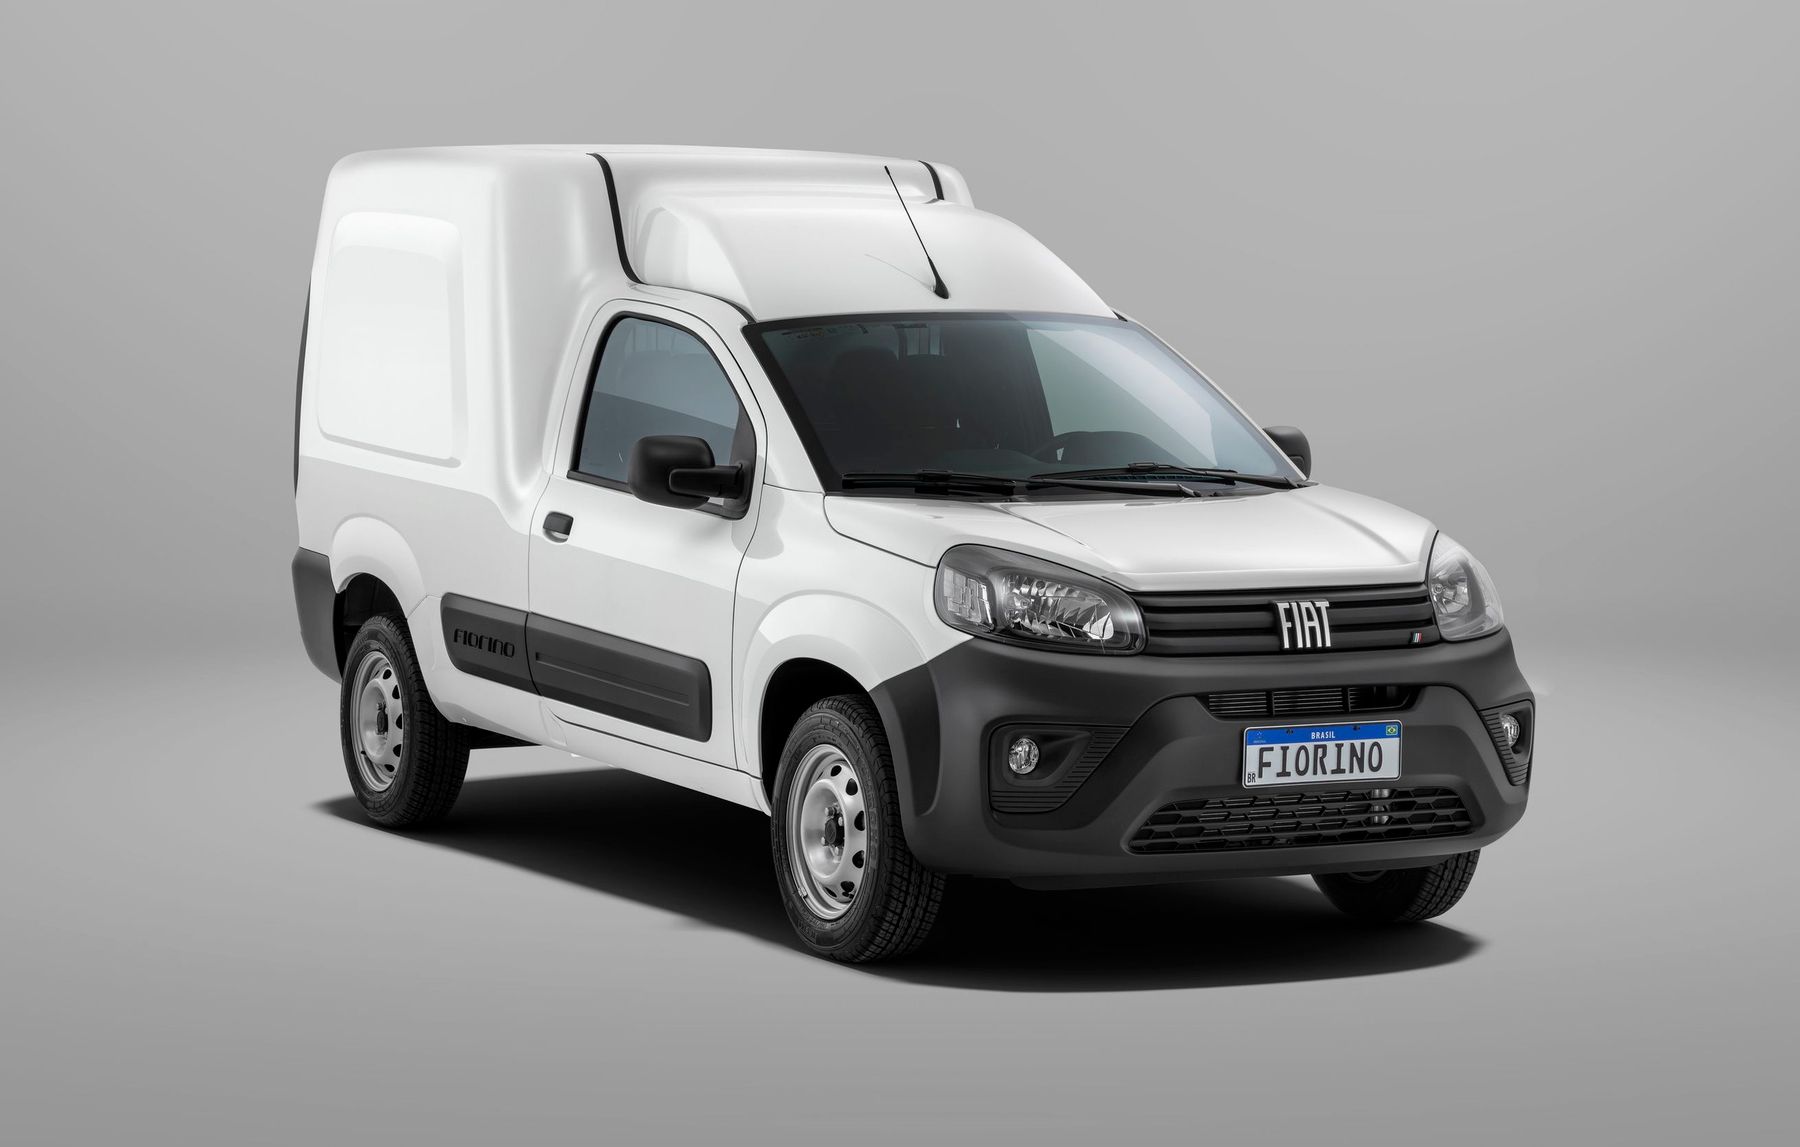 Fiat Fiorino: Compact Efficiency in Commercial Transportation